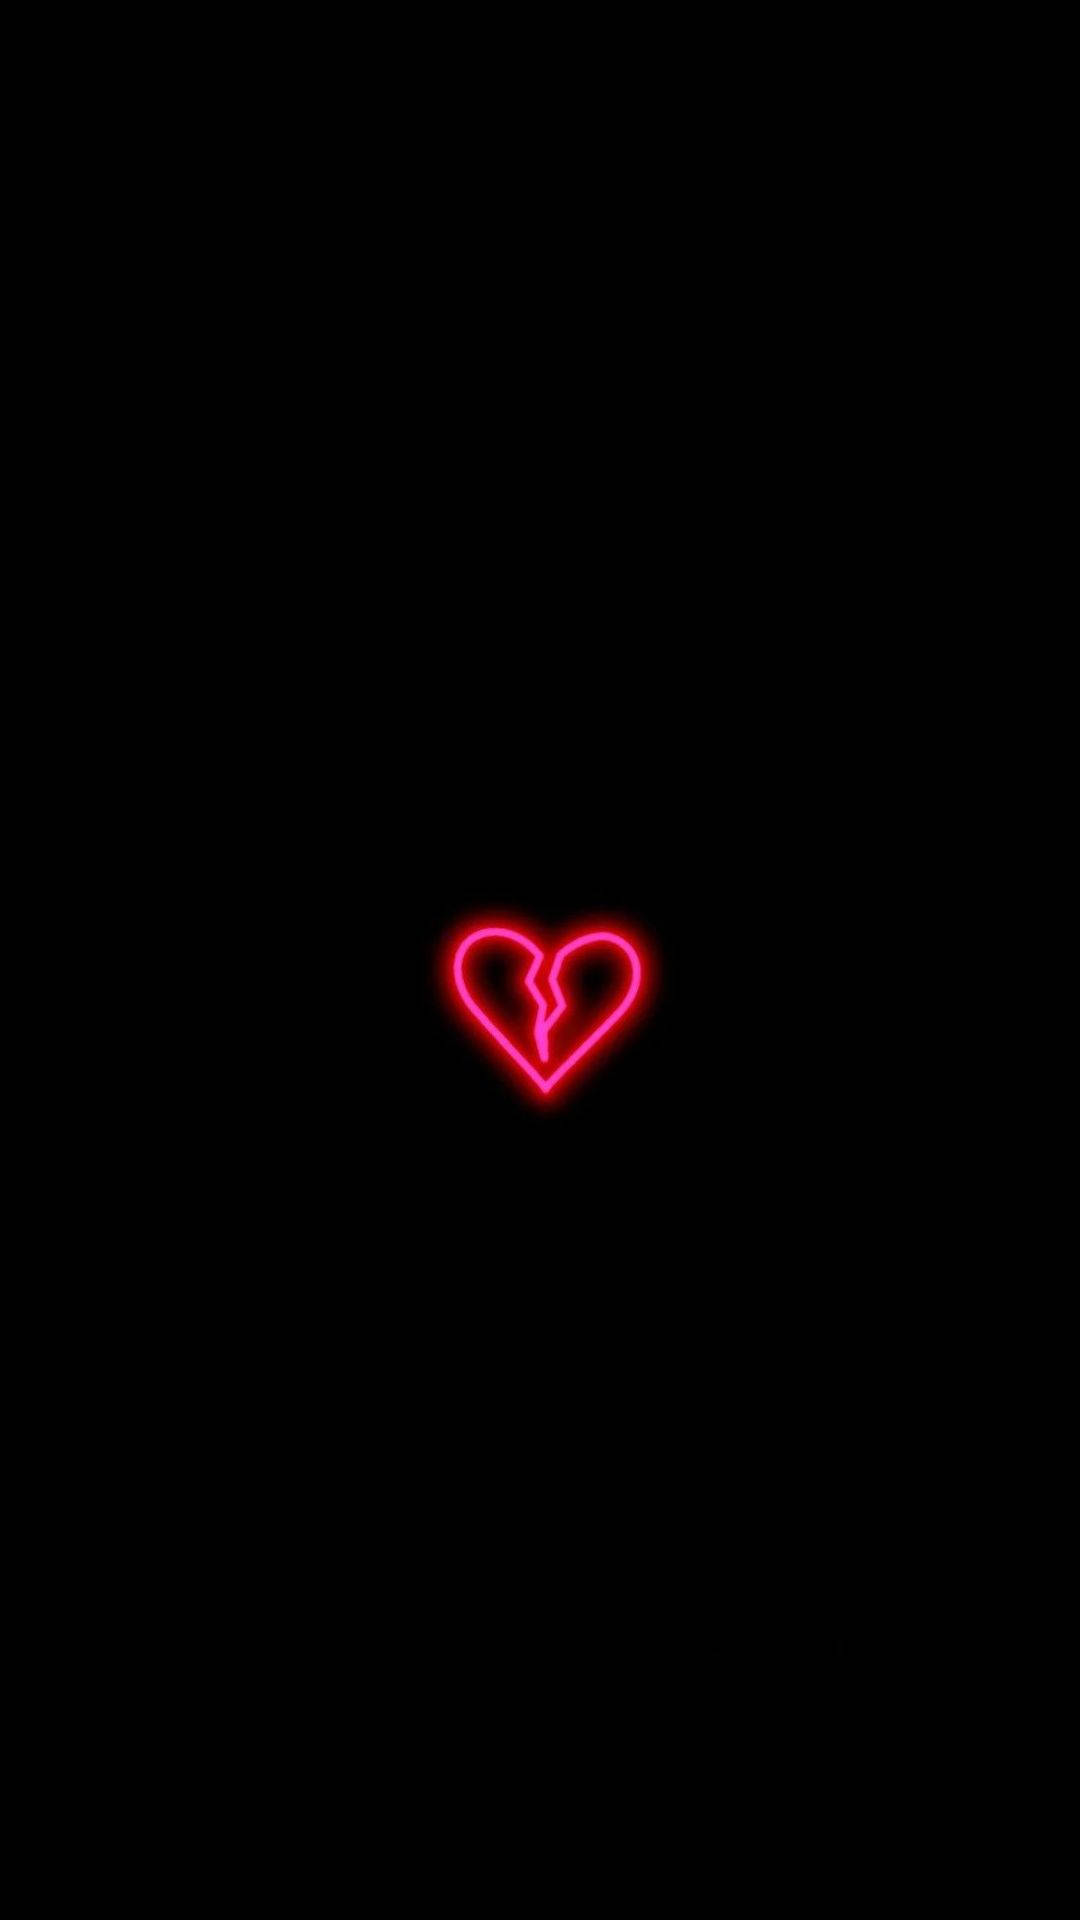 Black Heart With Red Led